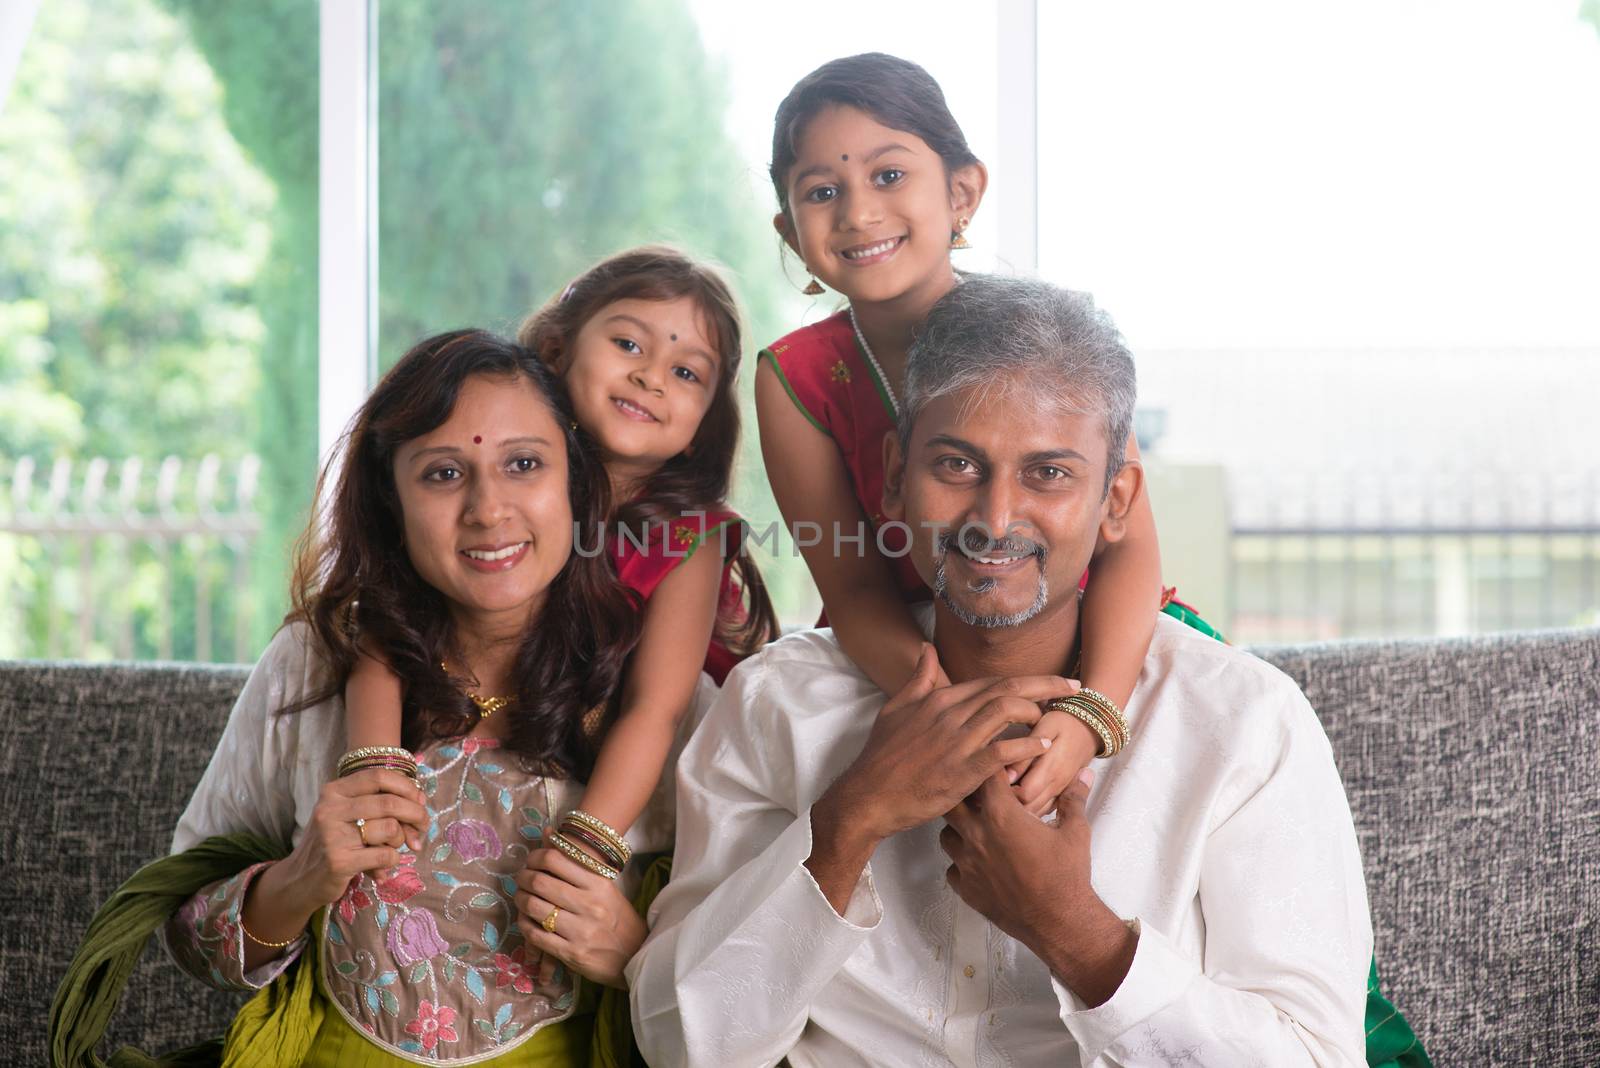 Happy Indian family at home. Asian parents piggyback their kids, sitting on sofa. Parents and children indoor lifestyle.